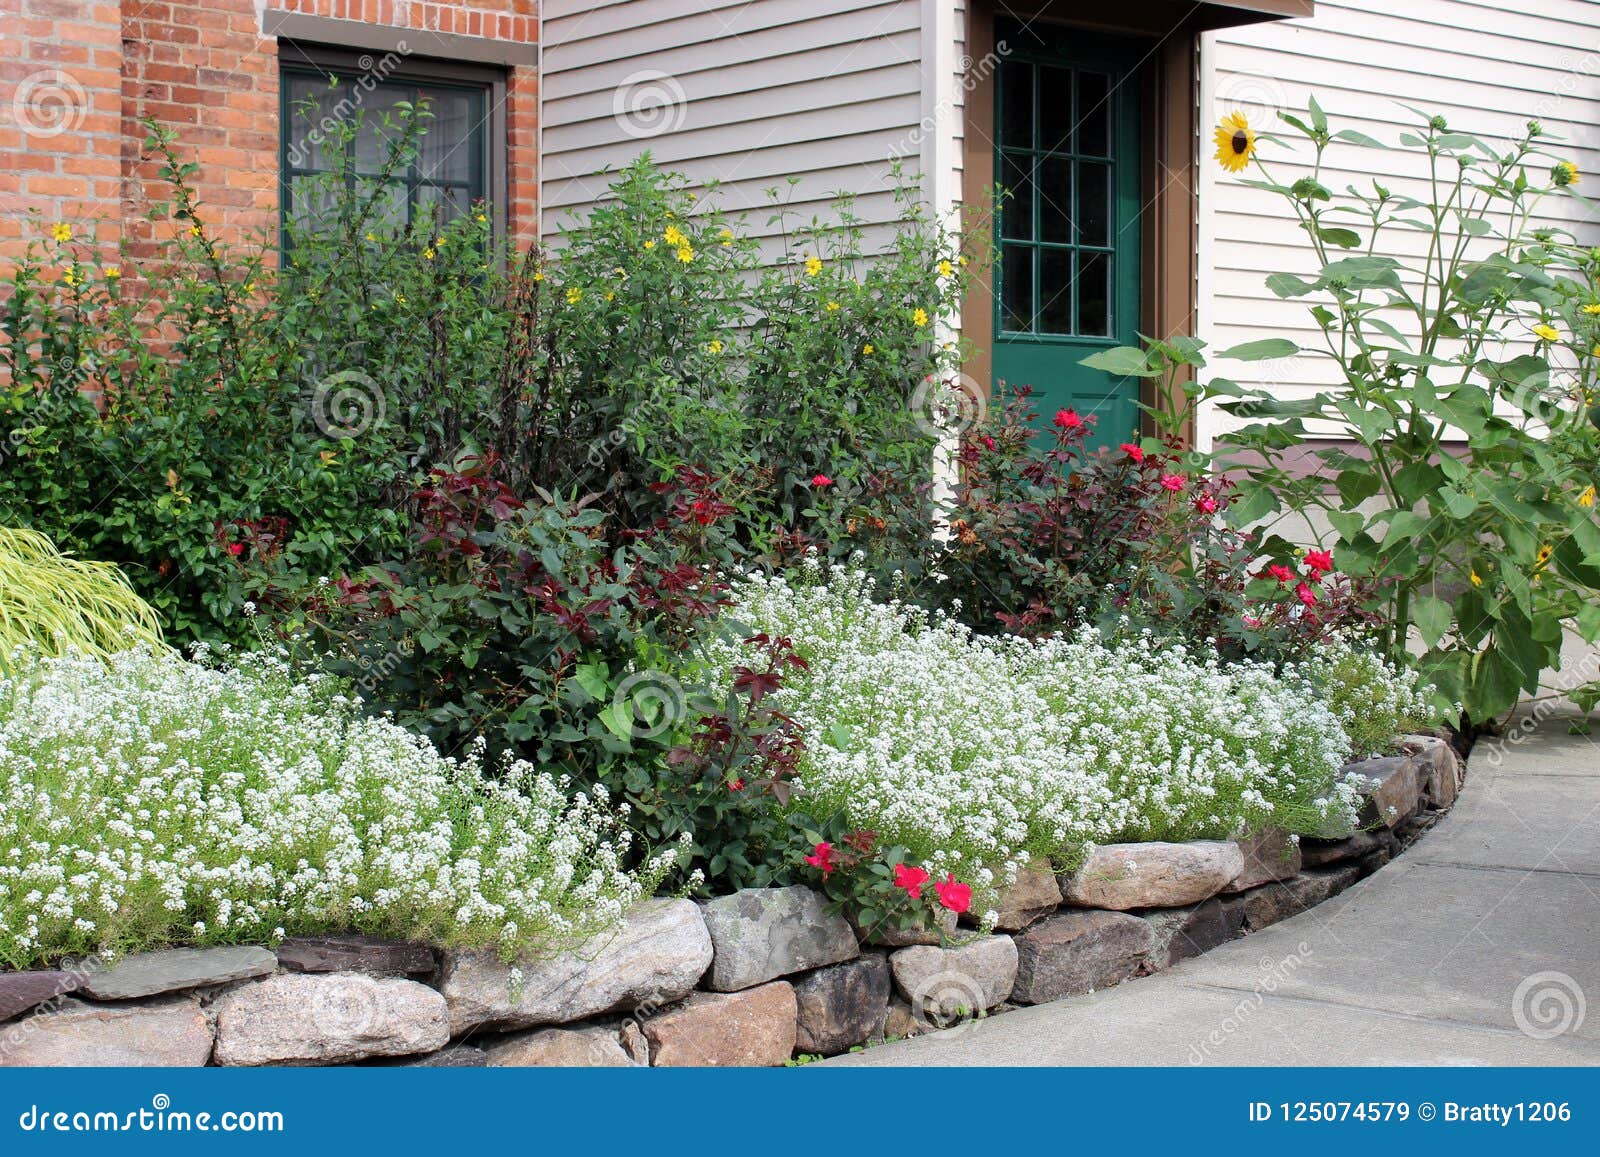 beautiful curbside appeal with stone wall and colorful flowers and